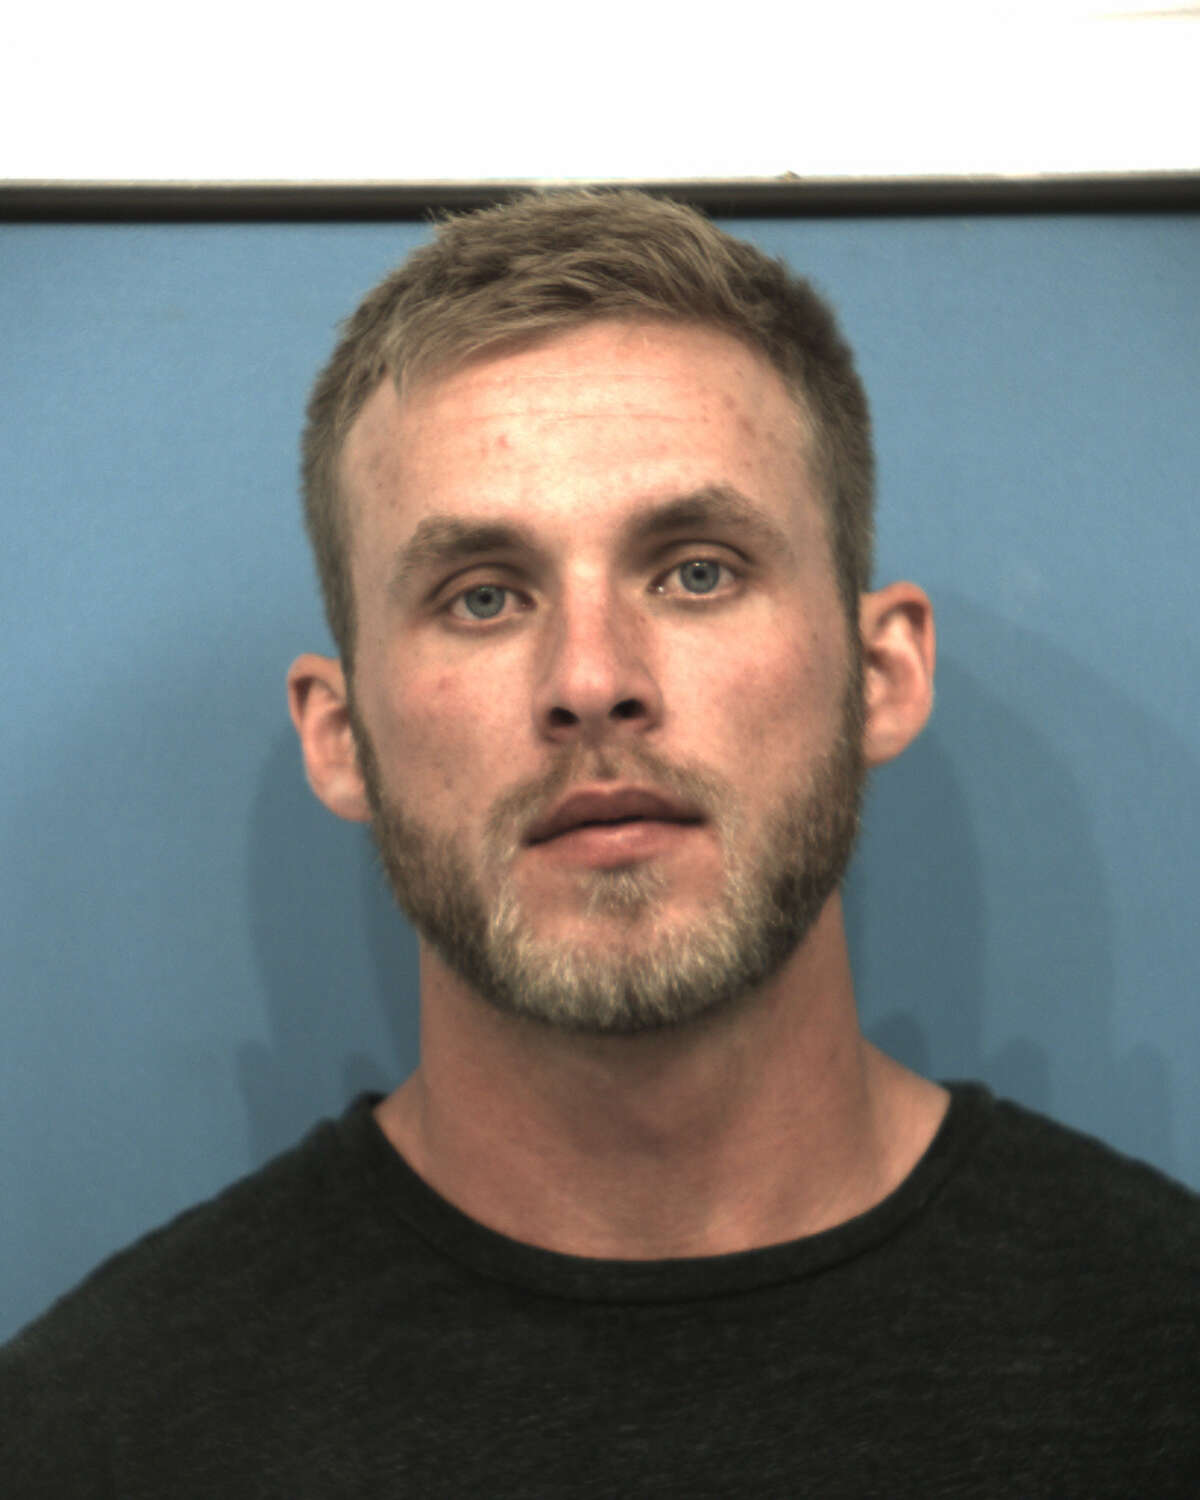 Jake Fenske, who is listed as a football and track coach and science teacher on Hutto High School's website, was charged with sexual assault of a child Tuesday. He was released after posting $150,000 bond.